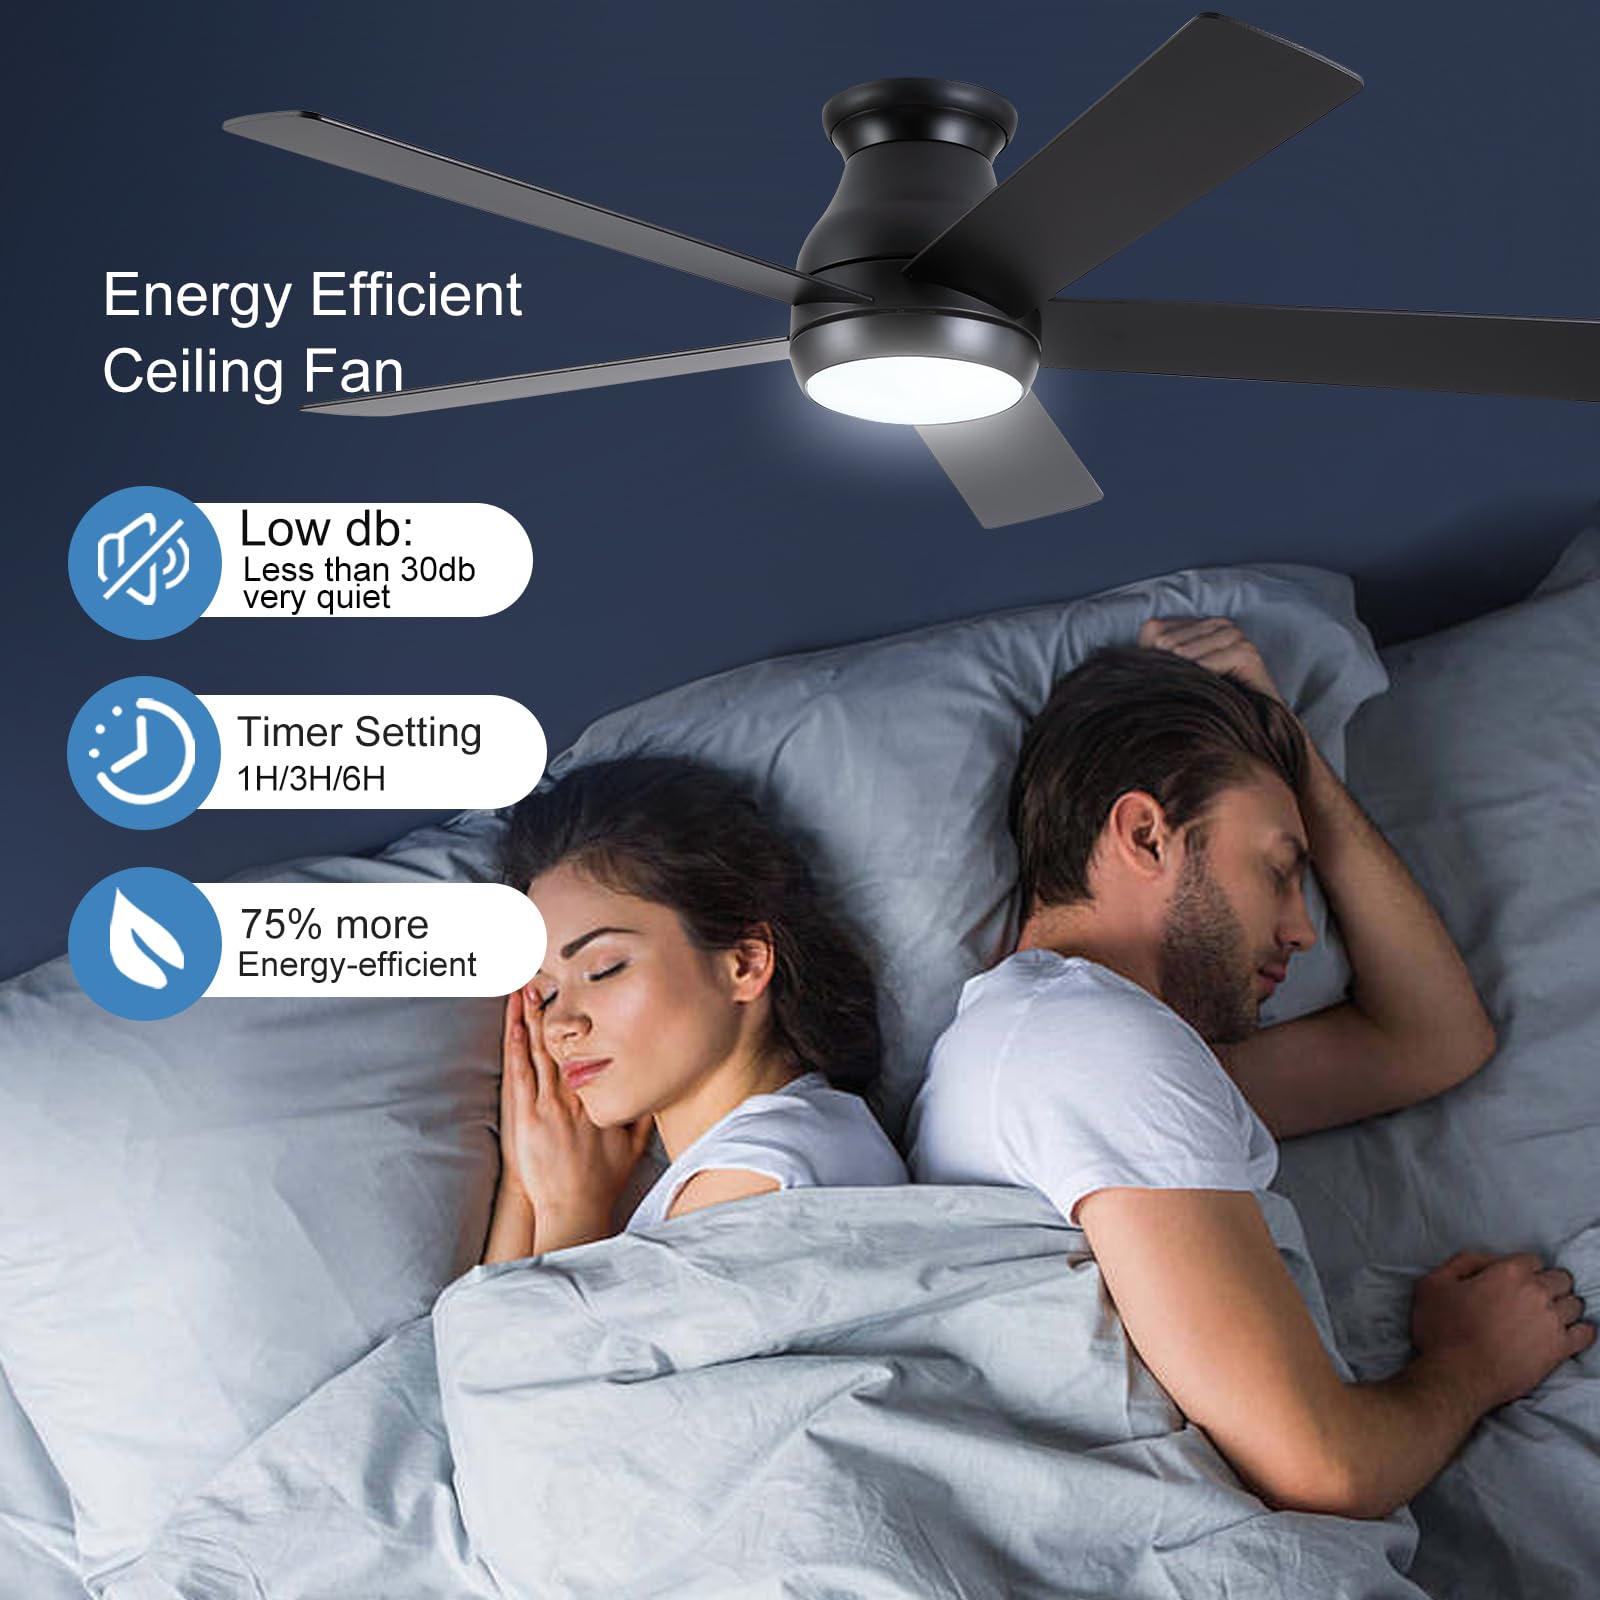 POCHFAN 52 Inch Low Profile Ceiling Fans With Lights and Remote, LED Flush Mount Black Ceiling Fan with Quiet DC Motor, Dimmable 6 Speeds Reversible Modern Ceiling Fan for Bedroom, Living Room